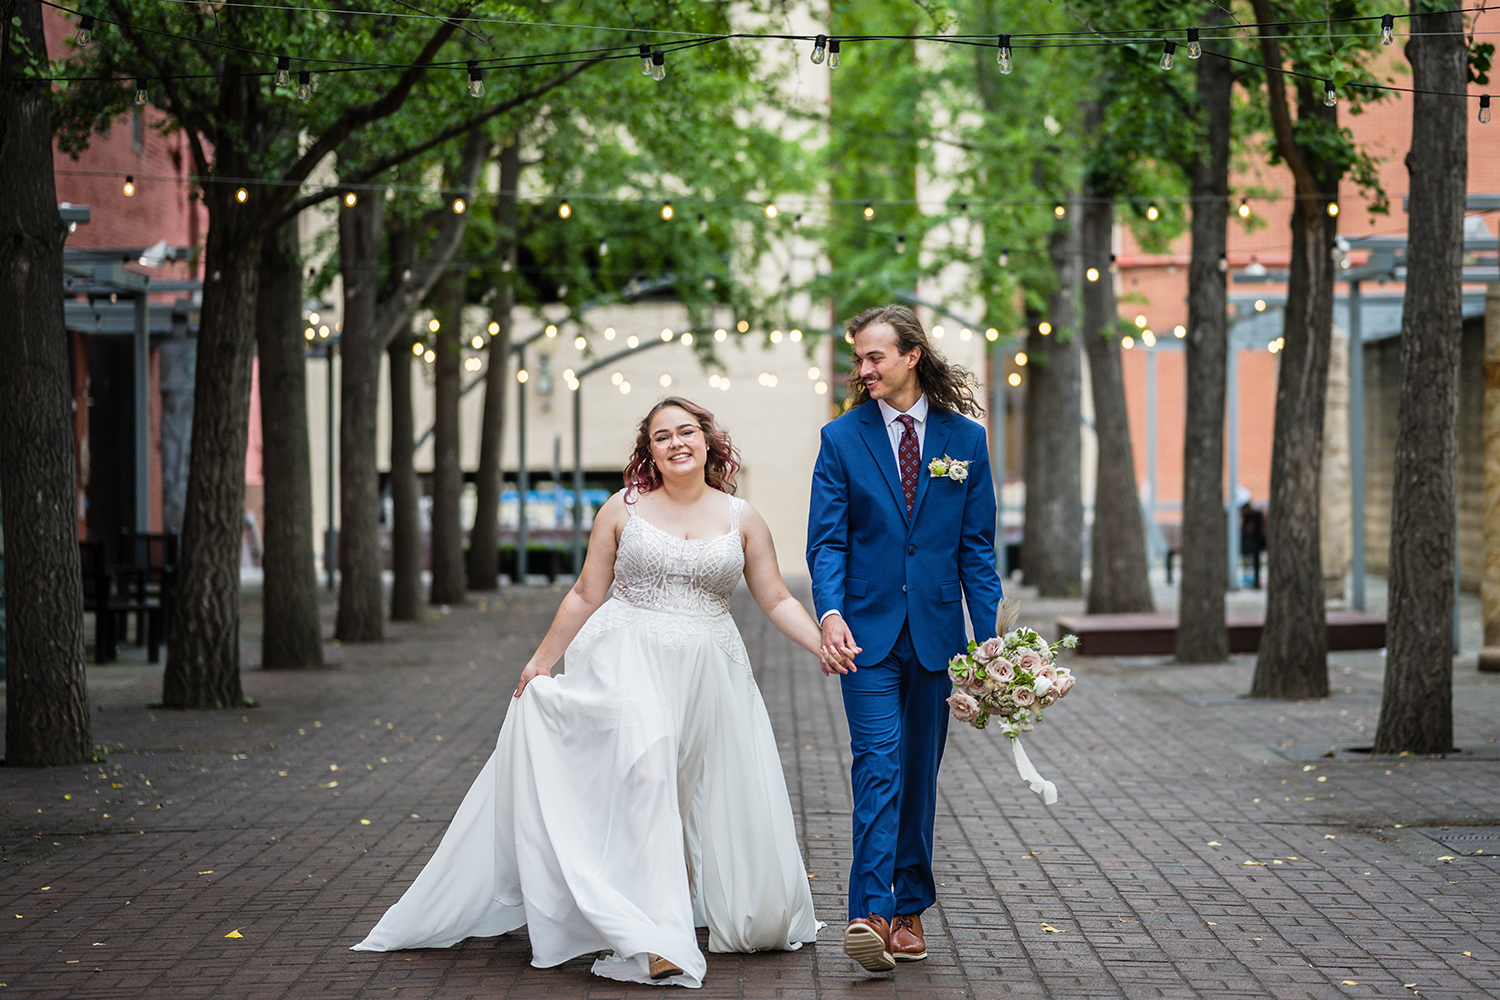 A couple walk hand-in-hand following their ceremony in Downtown Roanoke with smiles on their faces during their wedding guest free elopement day.